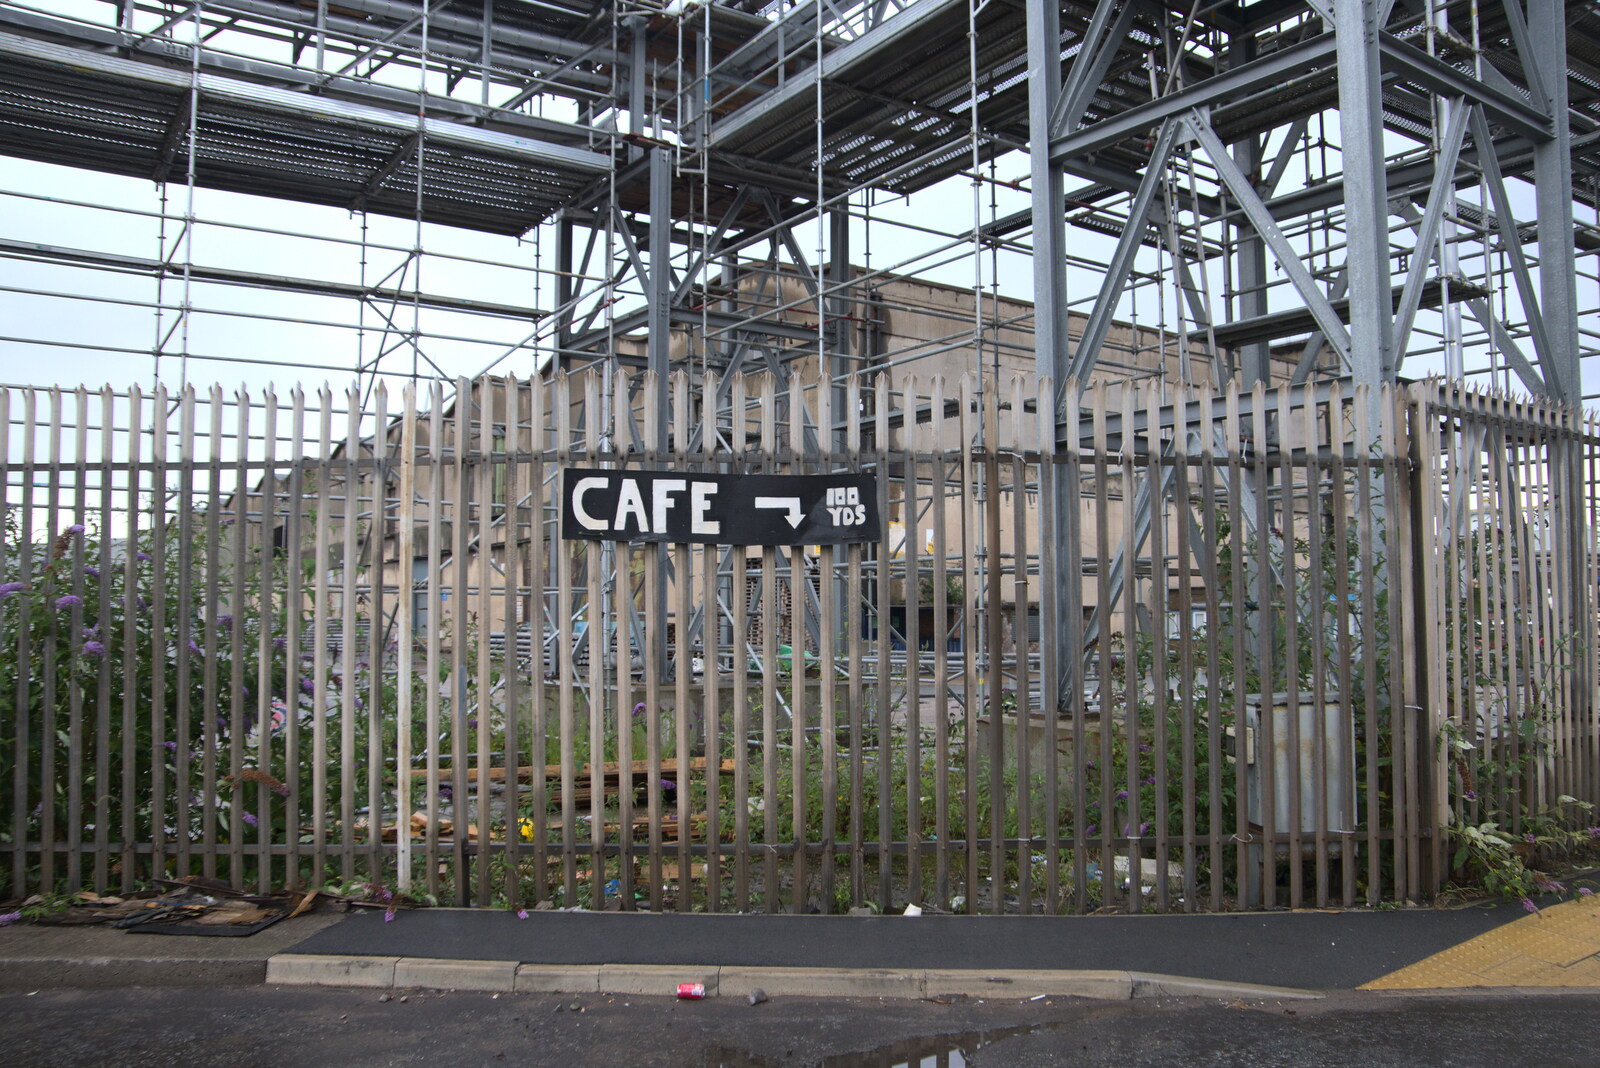 An abandoned Café sign on Regent Road from Pork Pies and Dockside Dereliction, Melton Mowbray and Liverpool - 7th August 2021